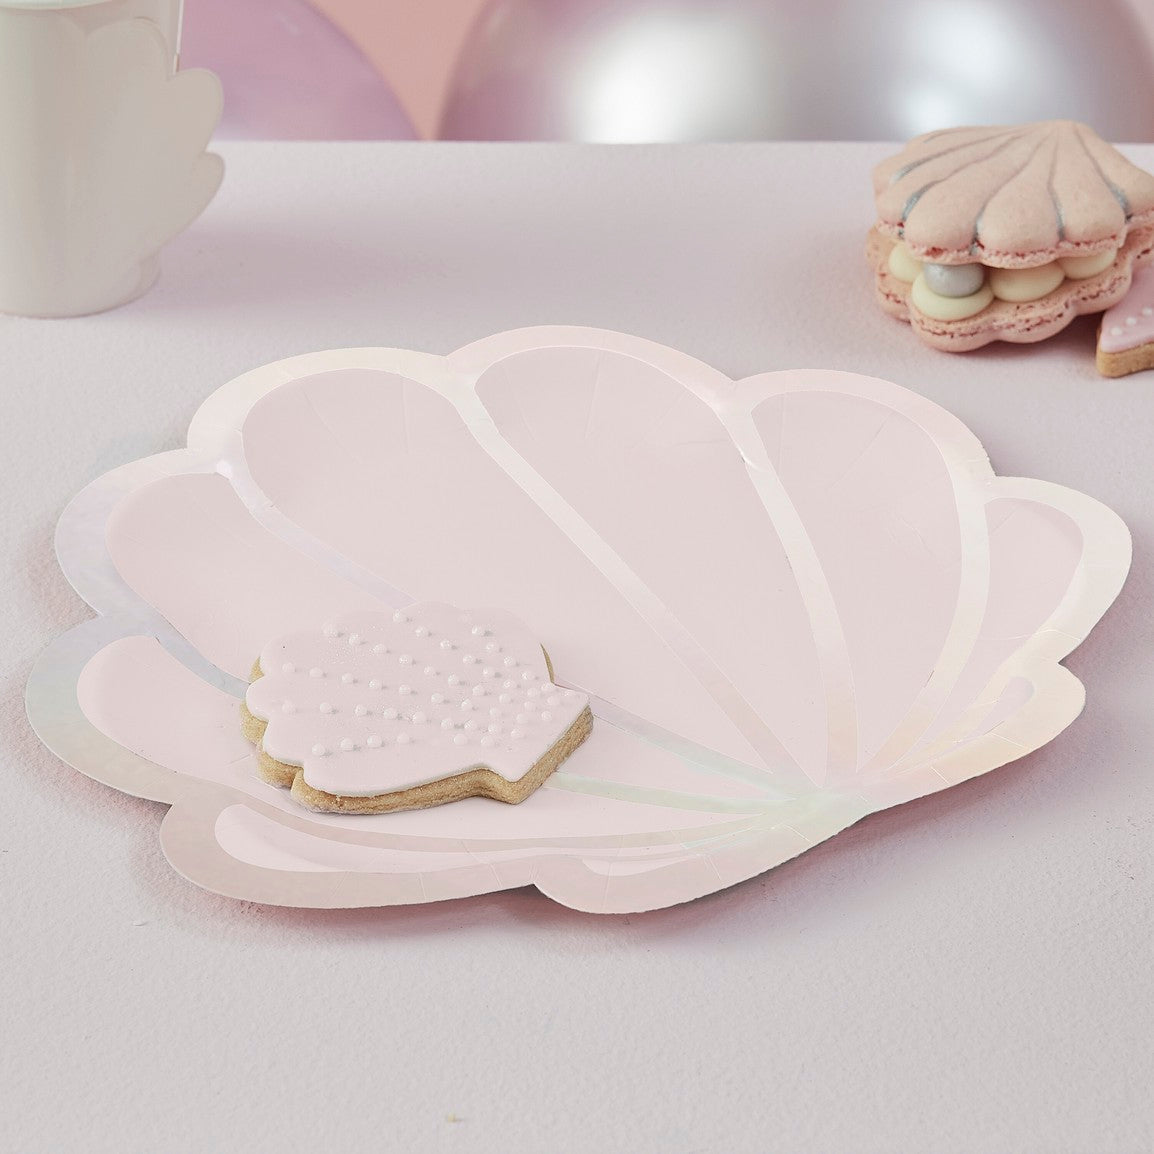 PLATES - PINK + IRIDESCENT CLAM SHELL